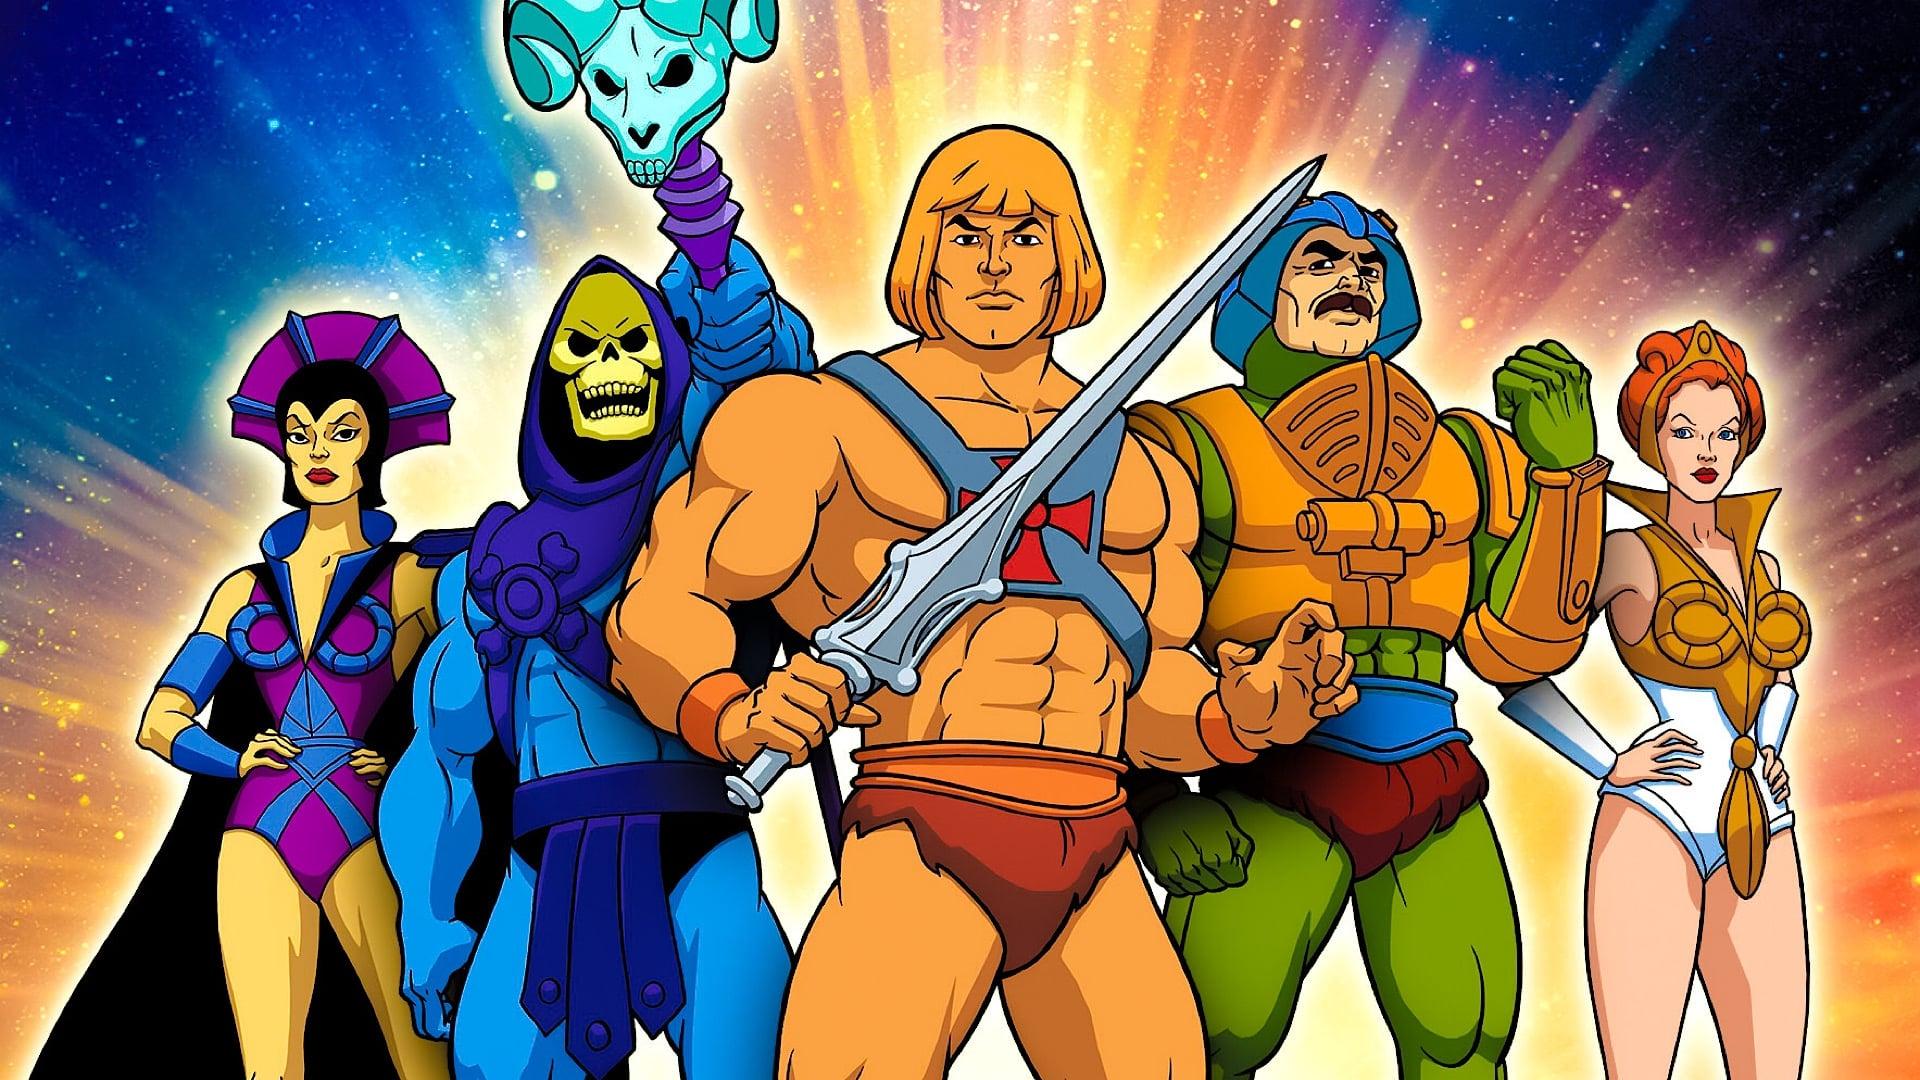 He-Man and the Masters of the Universe backdrop